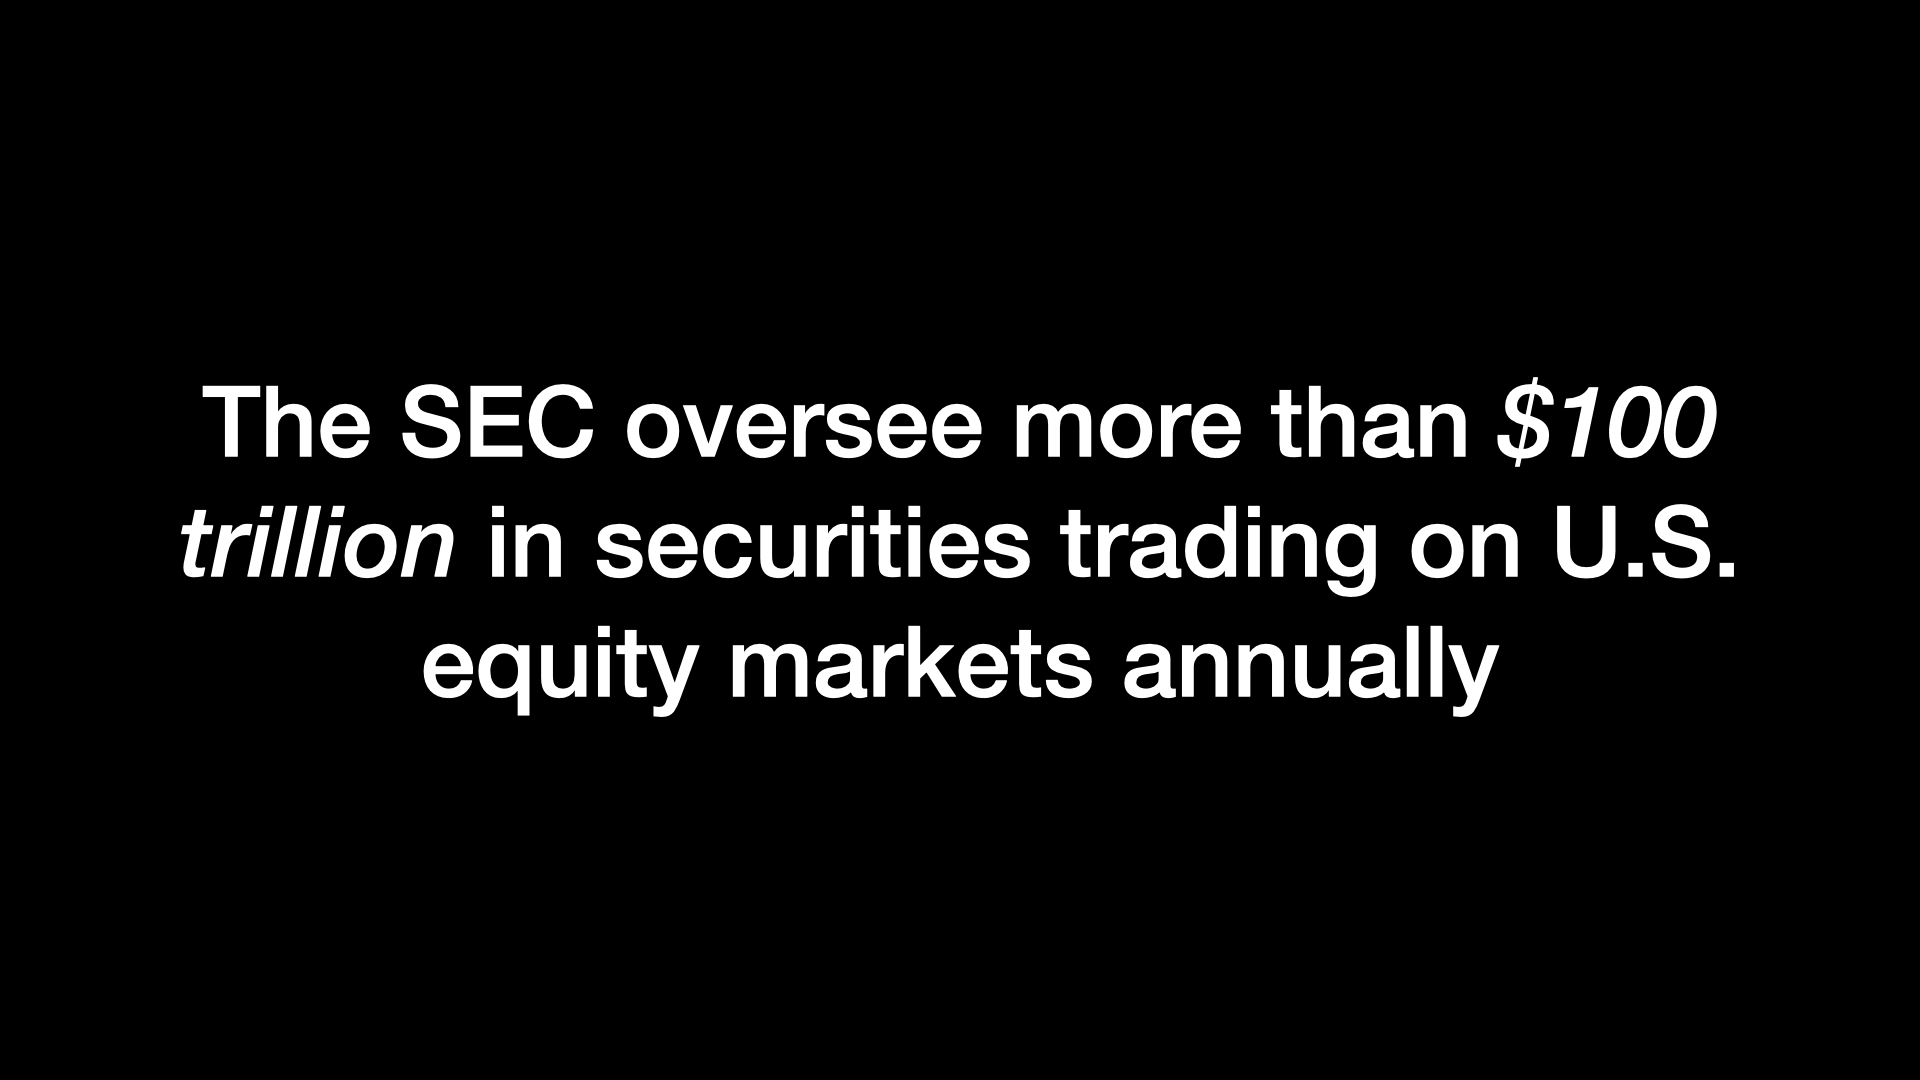 The SEC oversee more than $700 trillion in securities trading on U.S. equity markets annually 